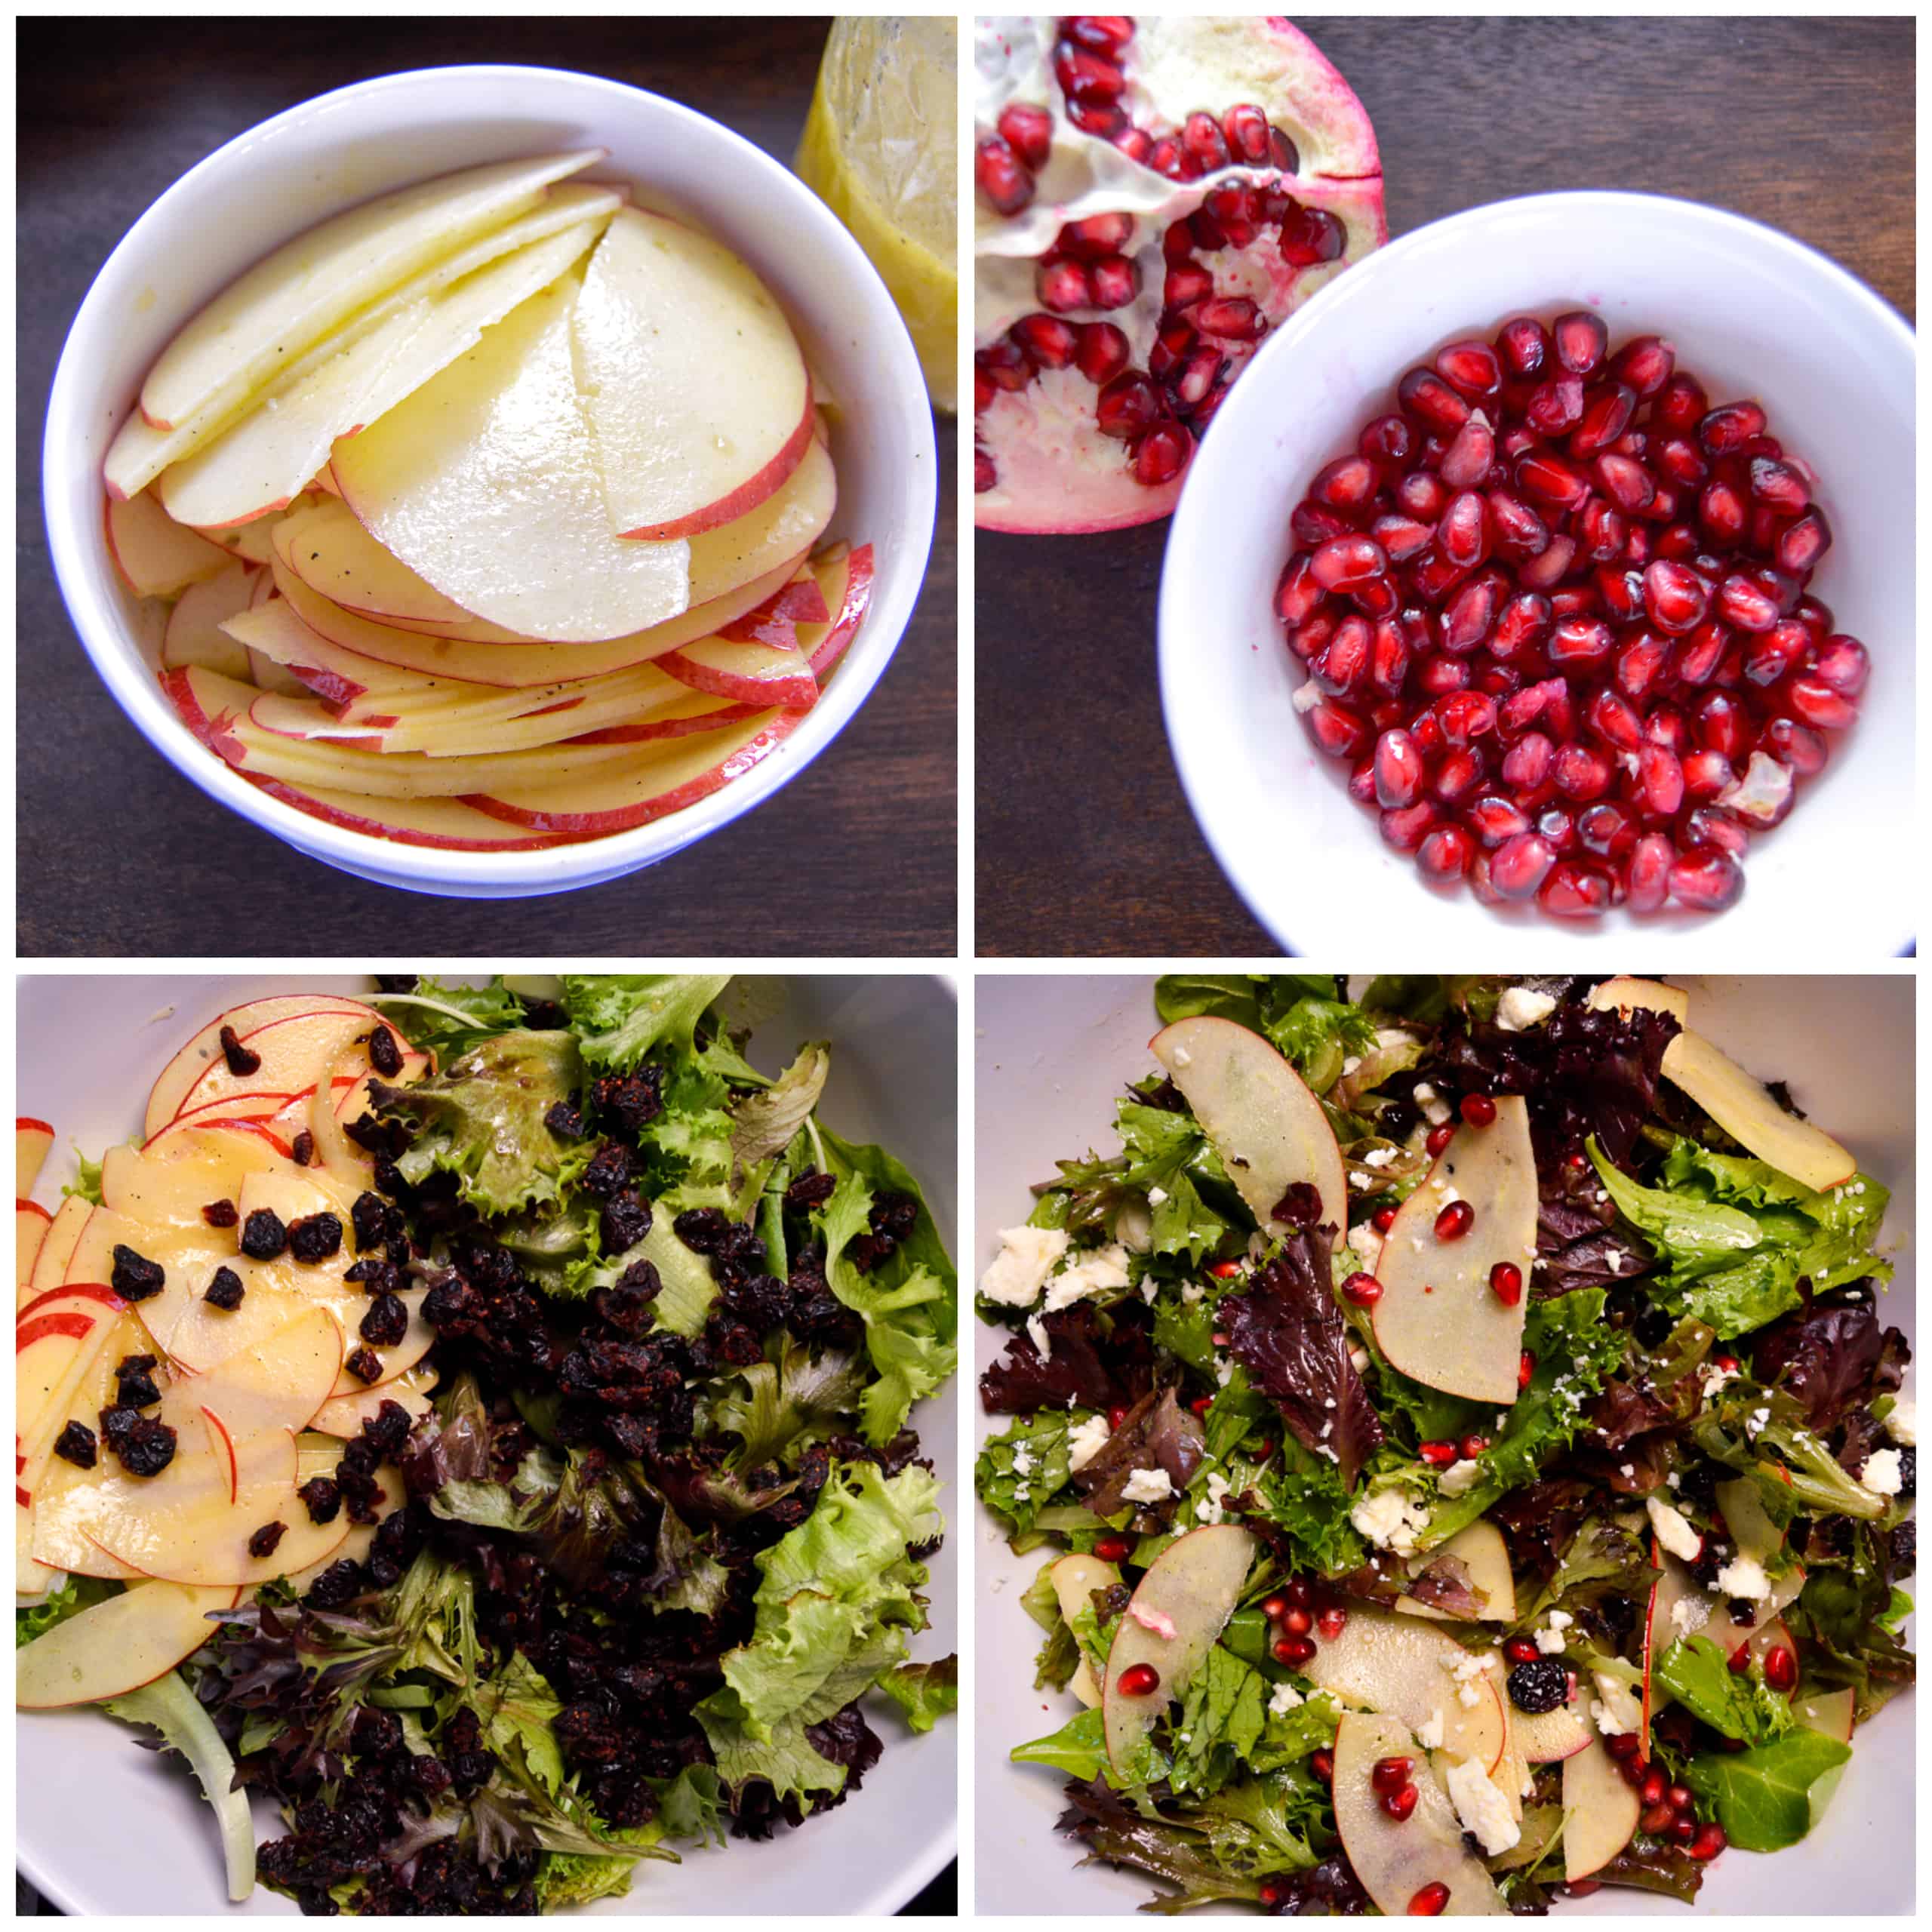 Apples sliced thin coated with apple cider vinaigrette, pomegranate arils in bowl with open pomegranate and salad with ingredients and then final mix with dressing